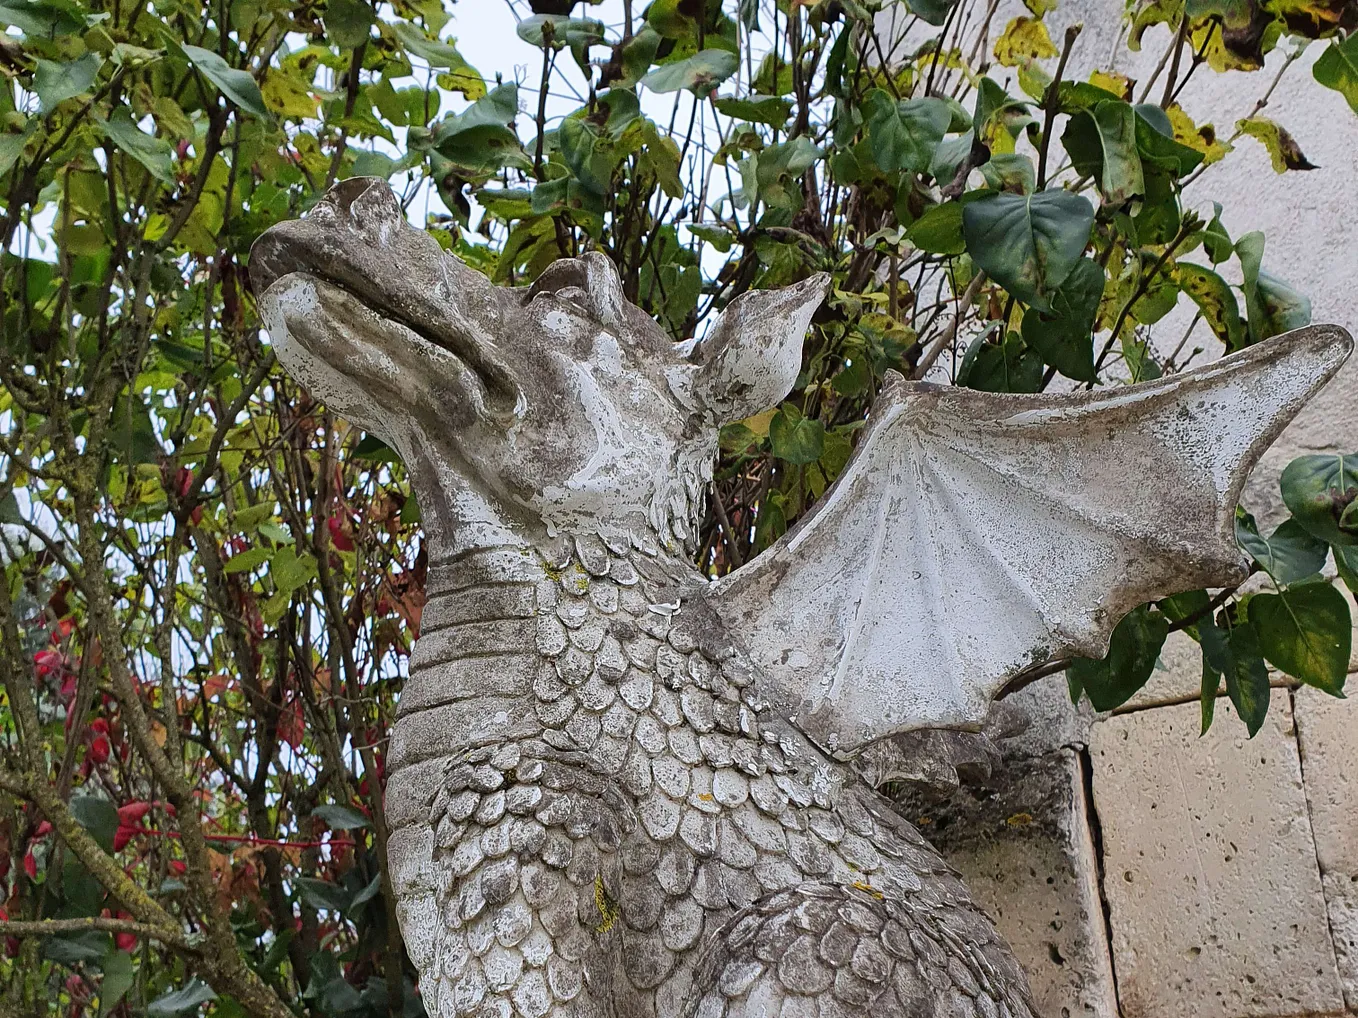 A stone statue of a sitting dragon, its snout turned to the sky.